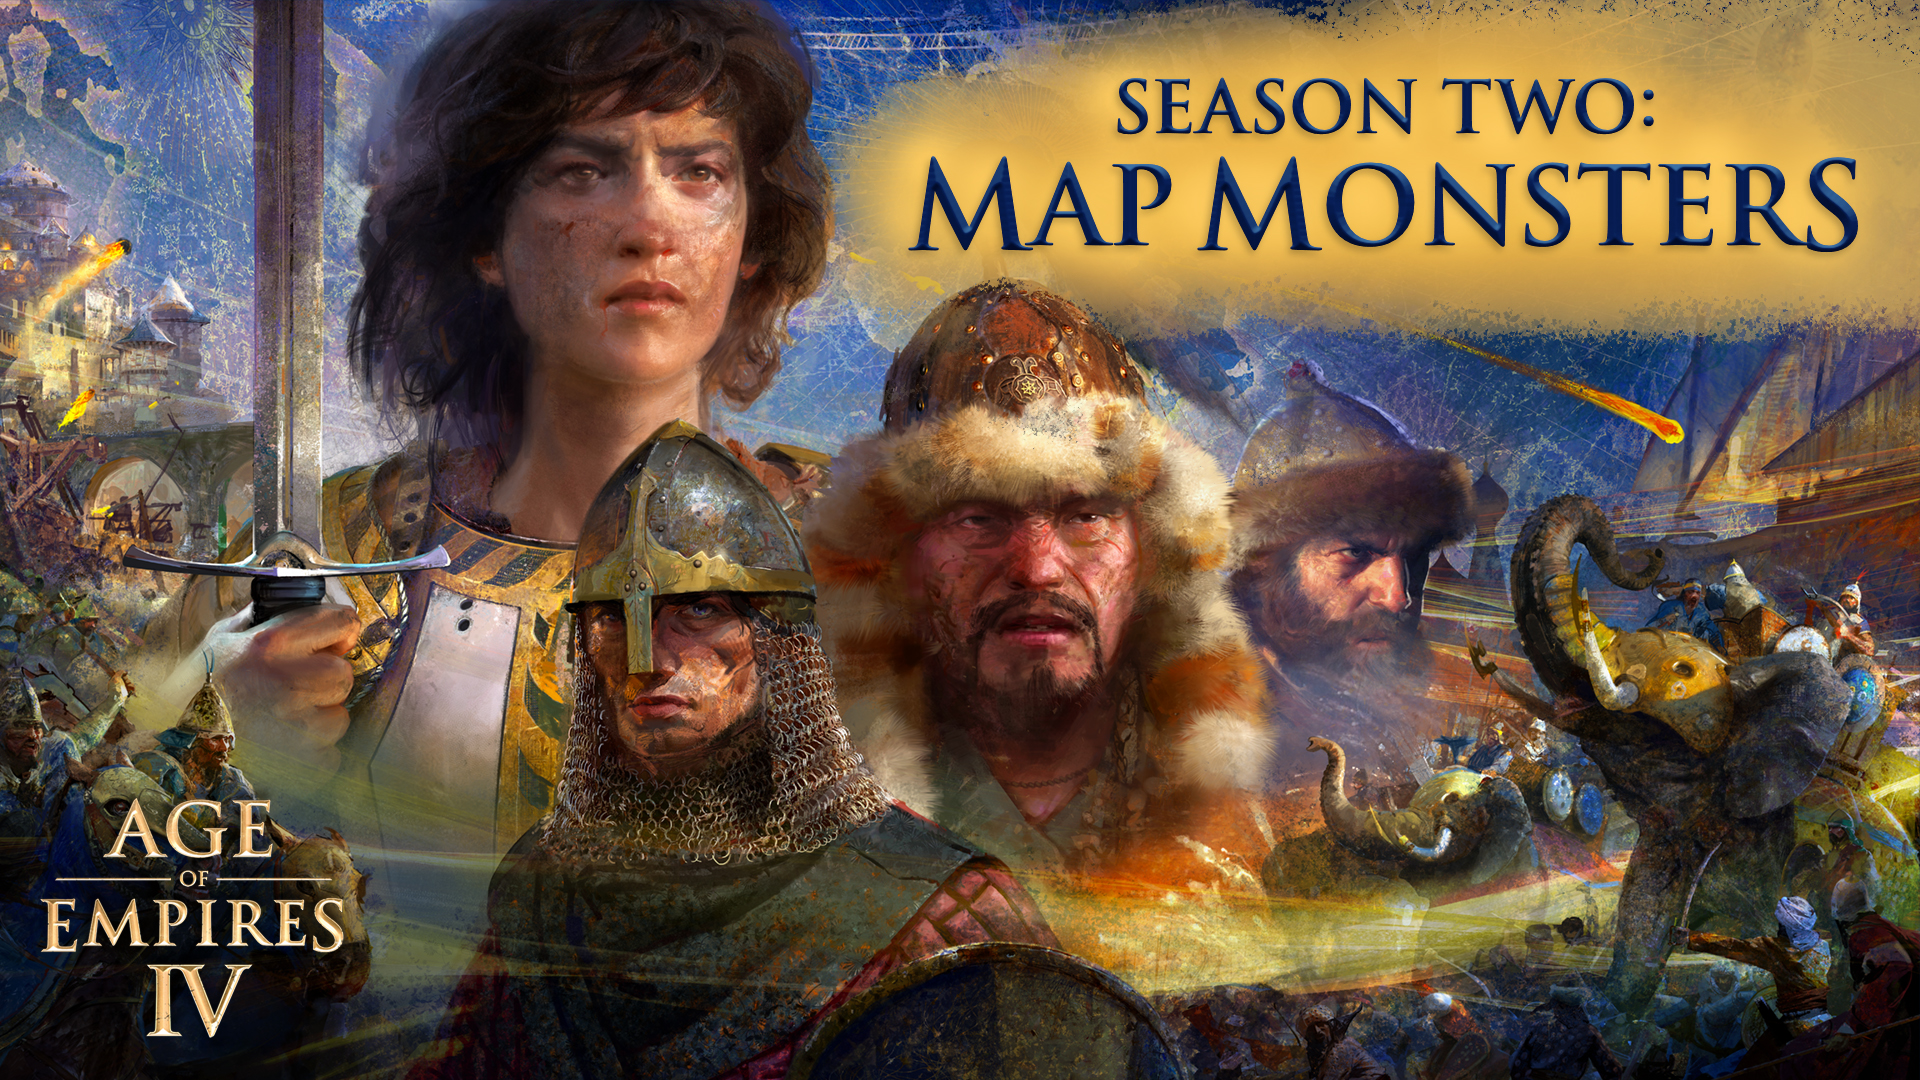 Age of Empires IV cover art with the words Season Two Map Monsters